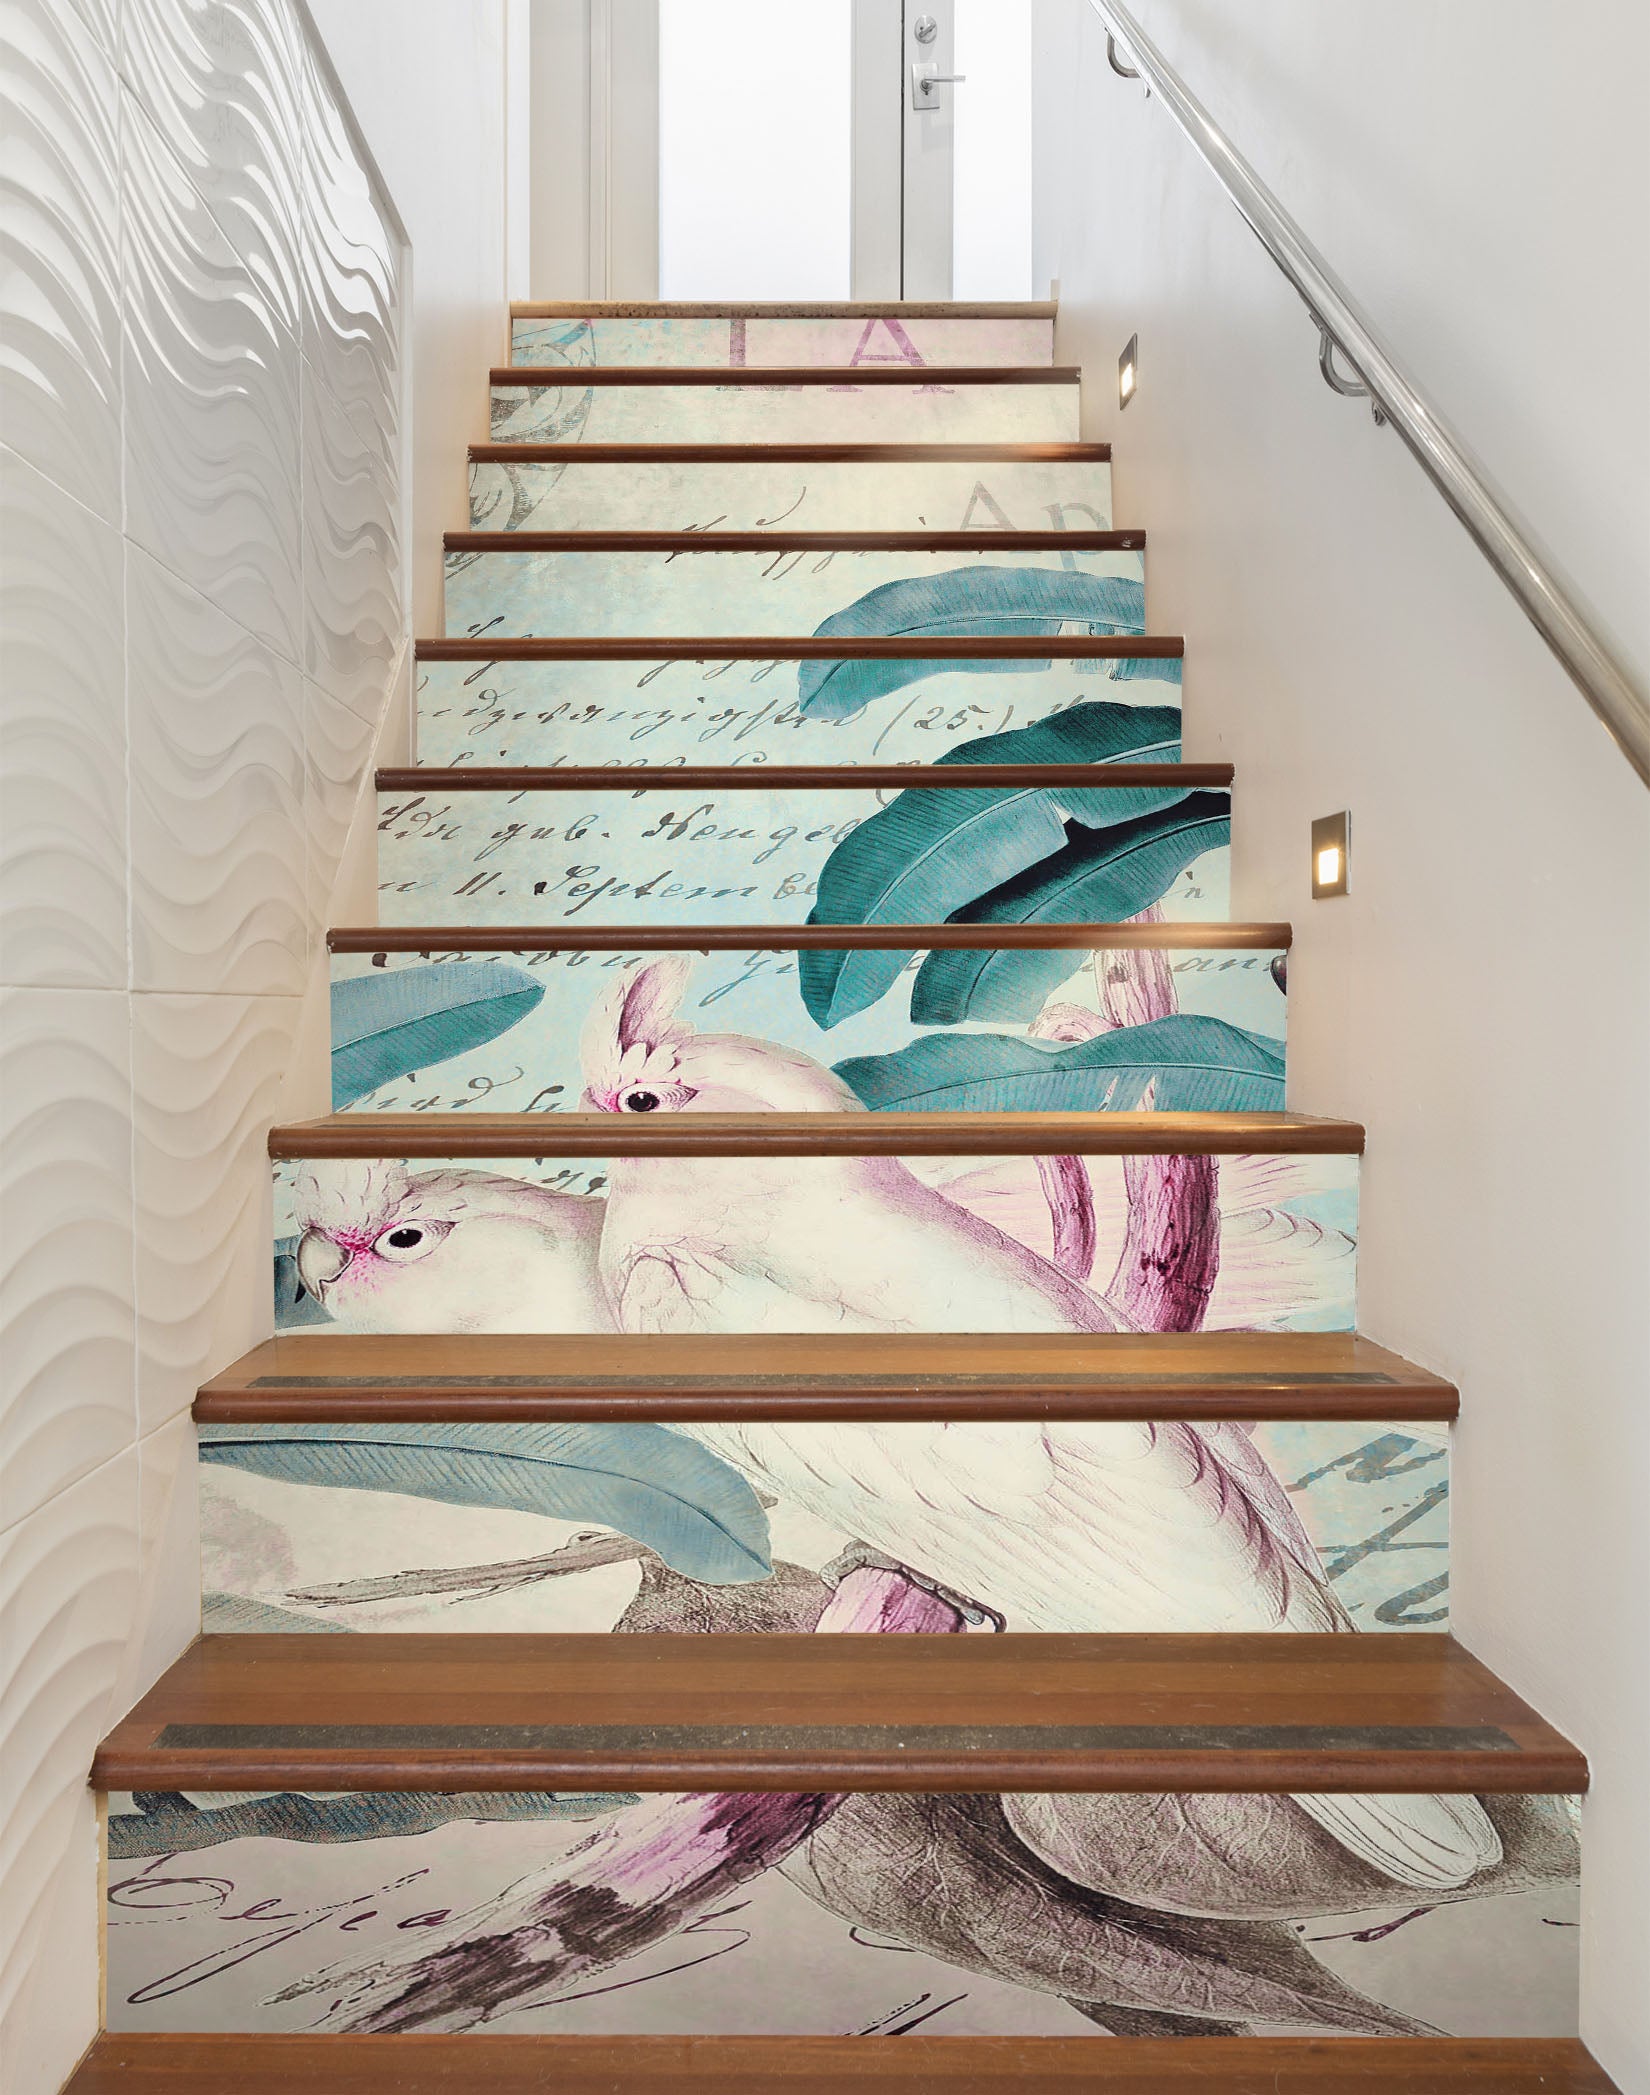 3D Leaves Parrot 11014 Andrea Haase Stair Risers